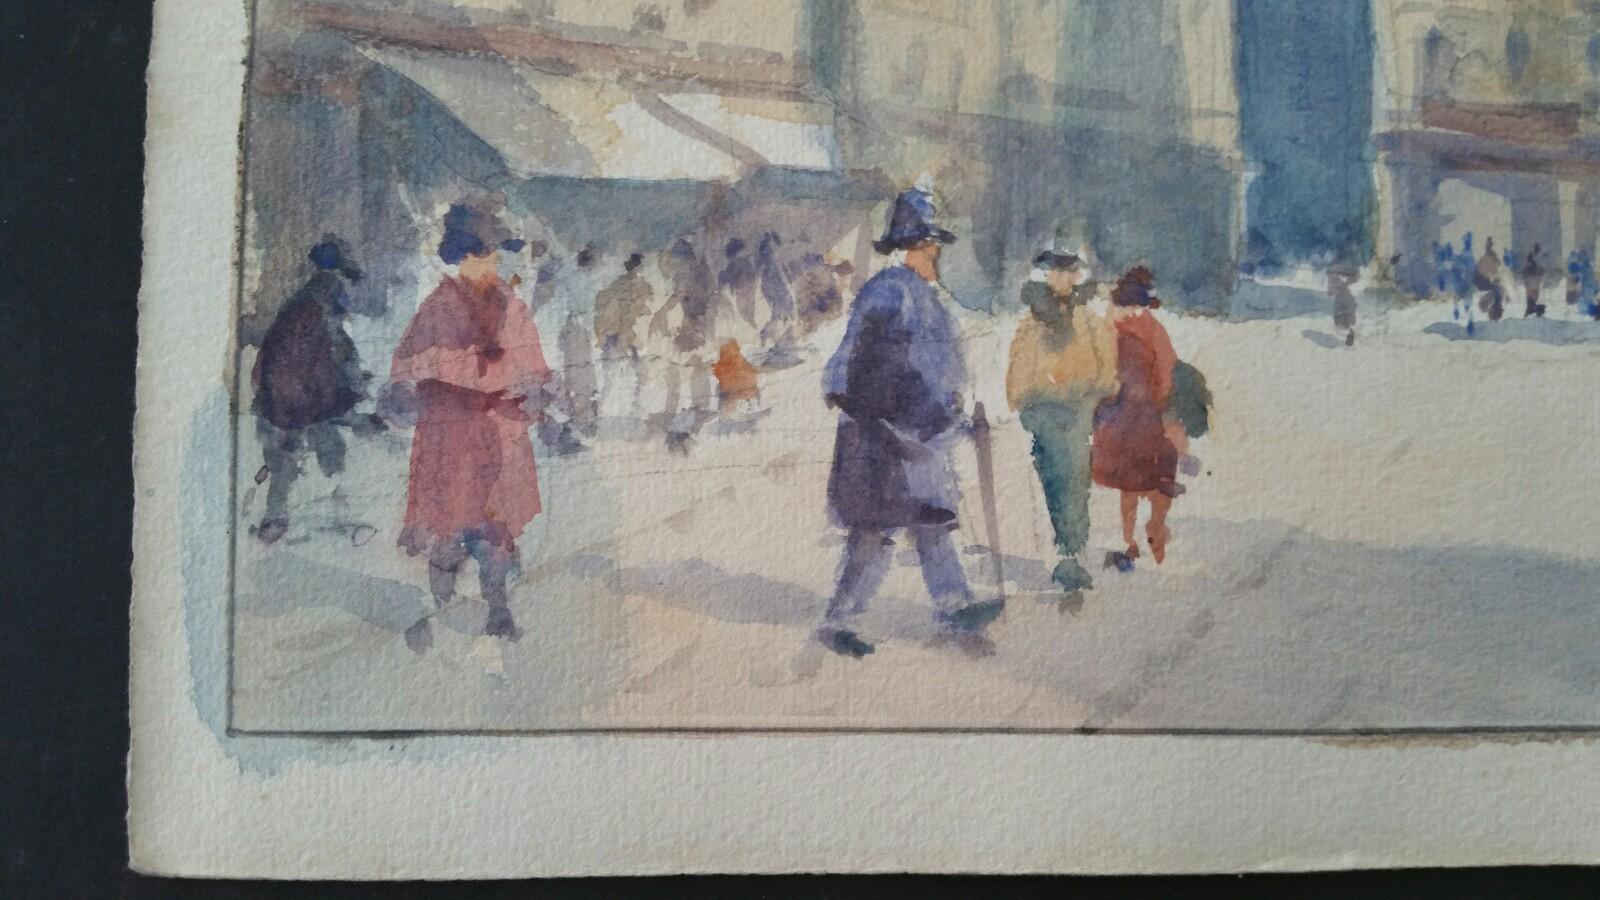 Belgium. Antwerp, a Double Sided Painting of a Busy Square 
by Leonard Machin Rowe (1880-1968)
signed and dated lower left on both sides
watercolour painting on artist's paper, unframed

Image 9.75 x 13.75 inches, sheet 11.x 15 inches

Tweo